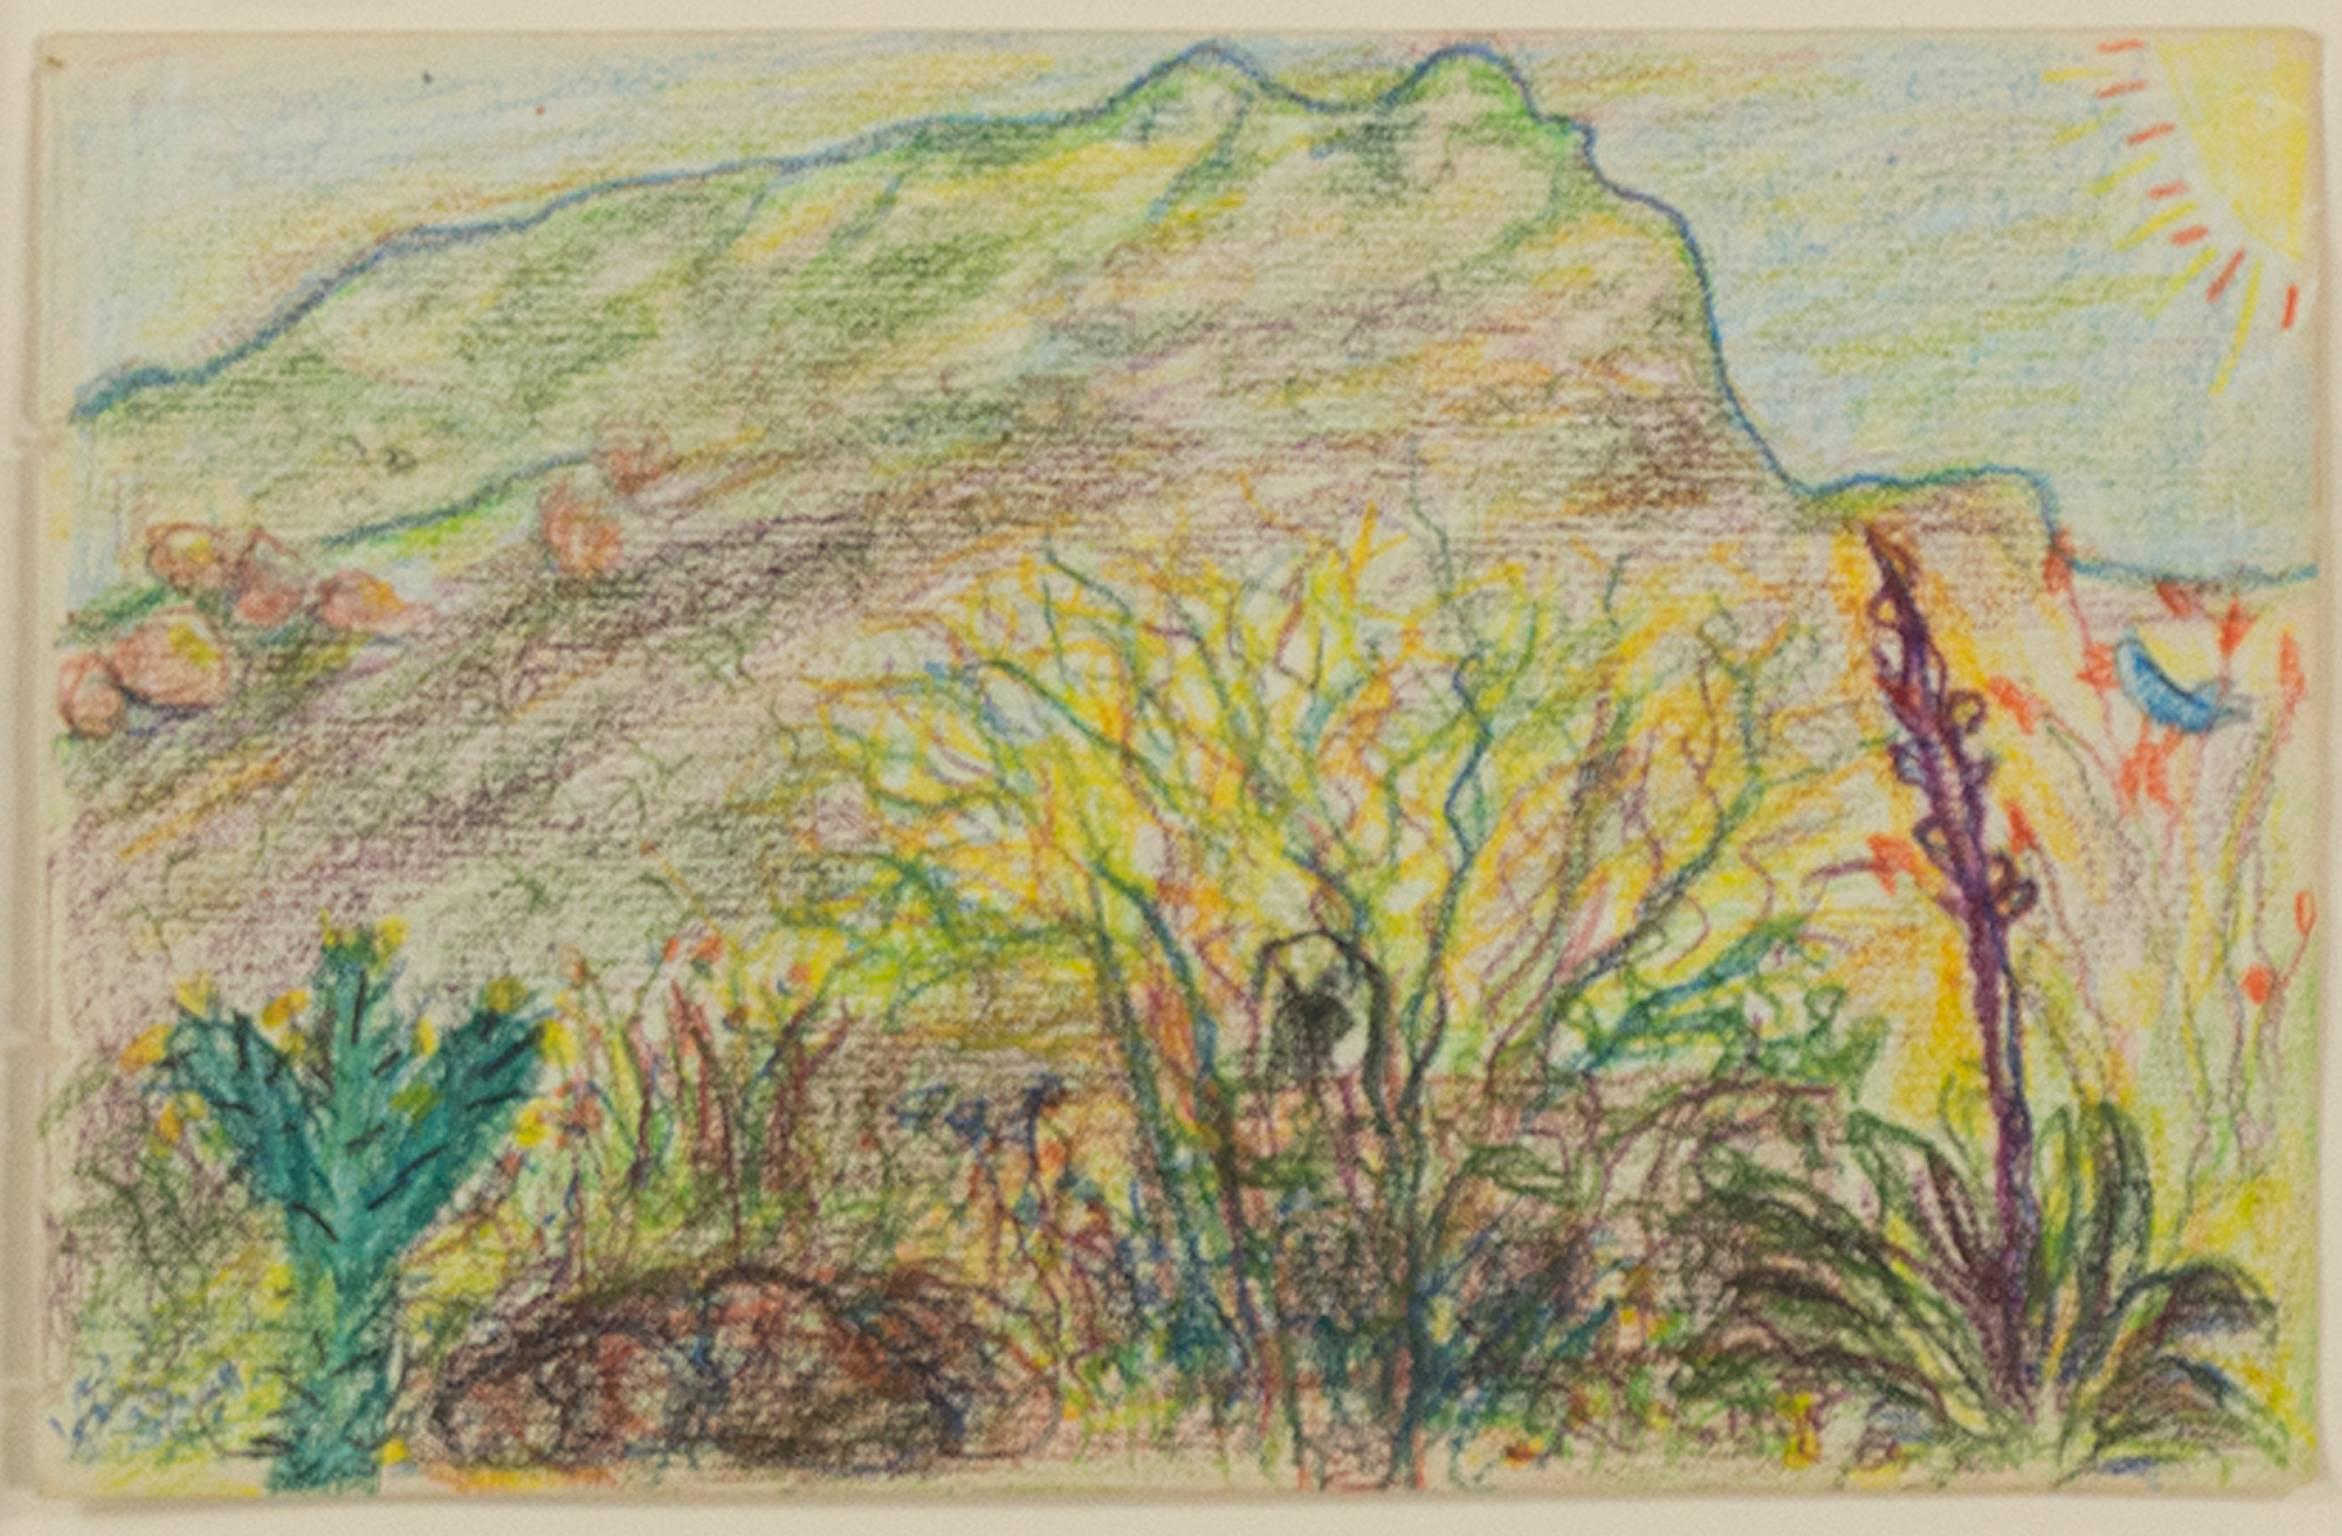 "The Boulders - Carefree, Arizona" is an original color pencil drawing on antique Wahltman paper by David Barnett. The artist signed and dated the piece. The carefree scribbles and marks are reminiscent of the artwork's namesake. Barnett has